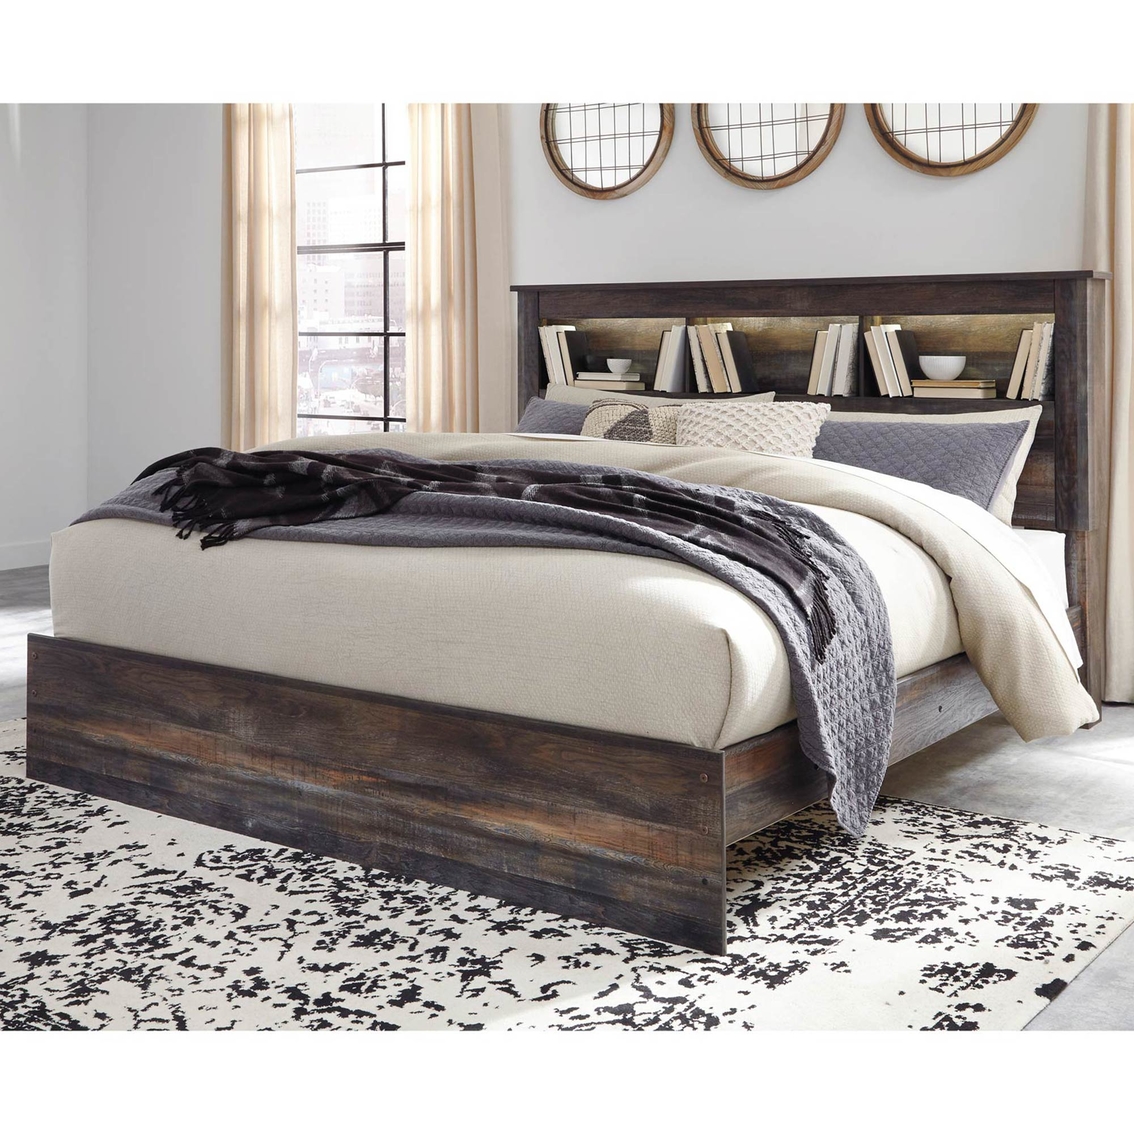 Signature Design by Ashley Drystan Bookcase Headboard Bed - Image 2 of 4